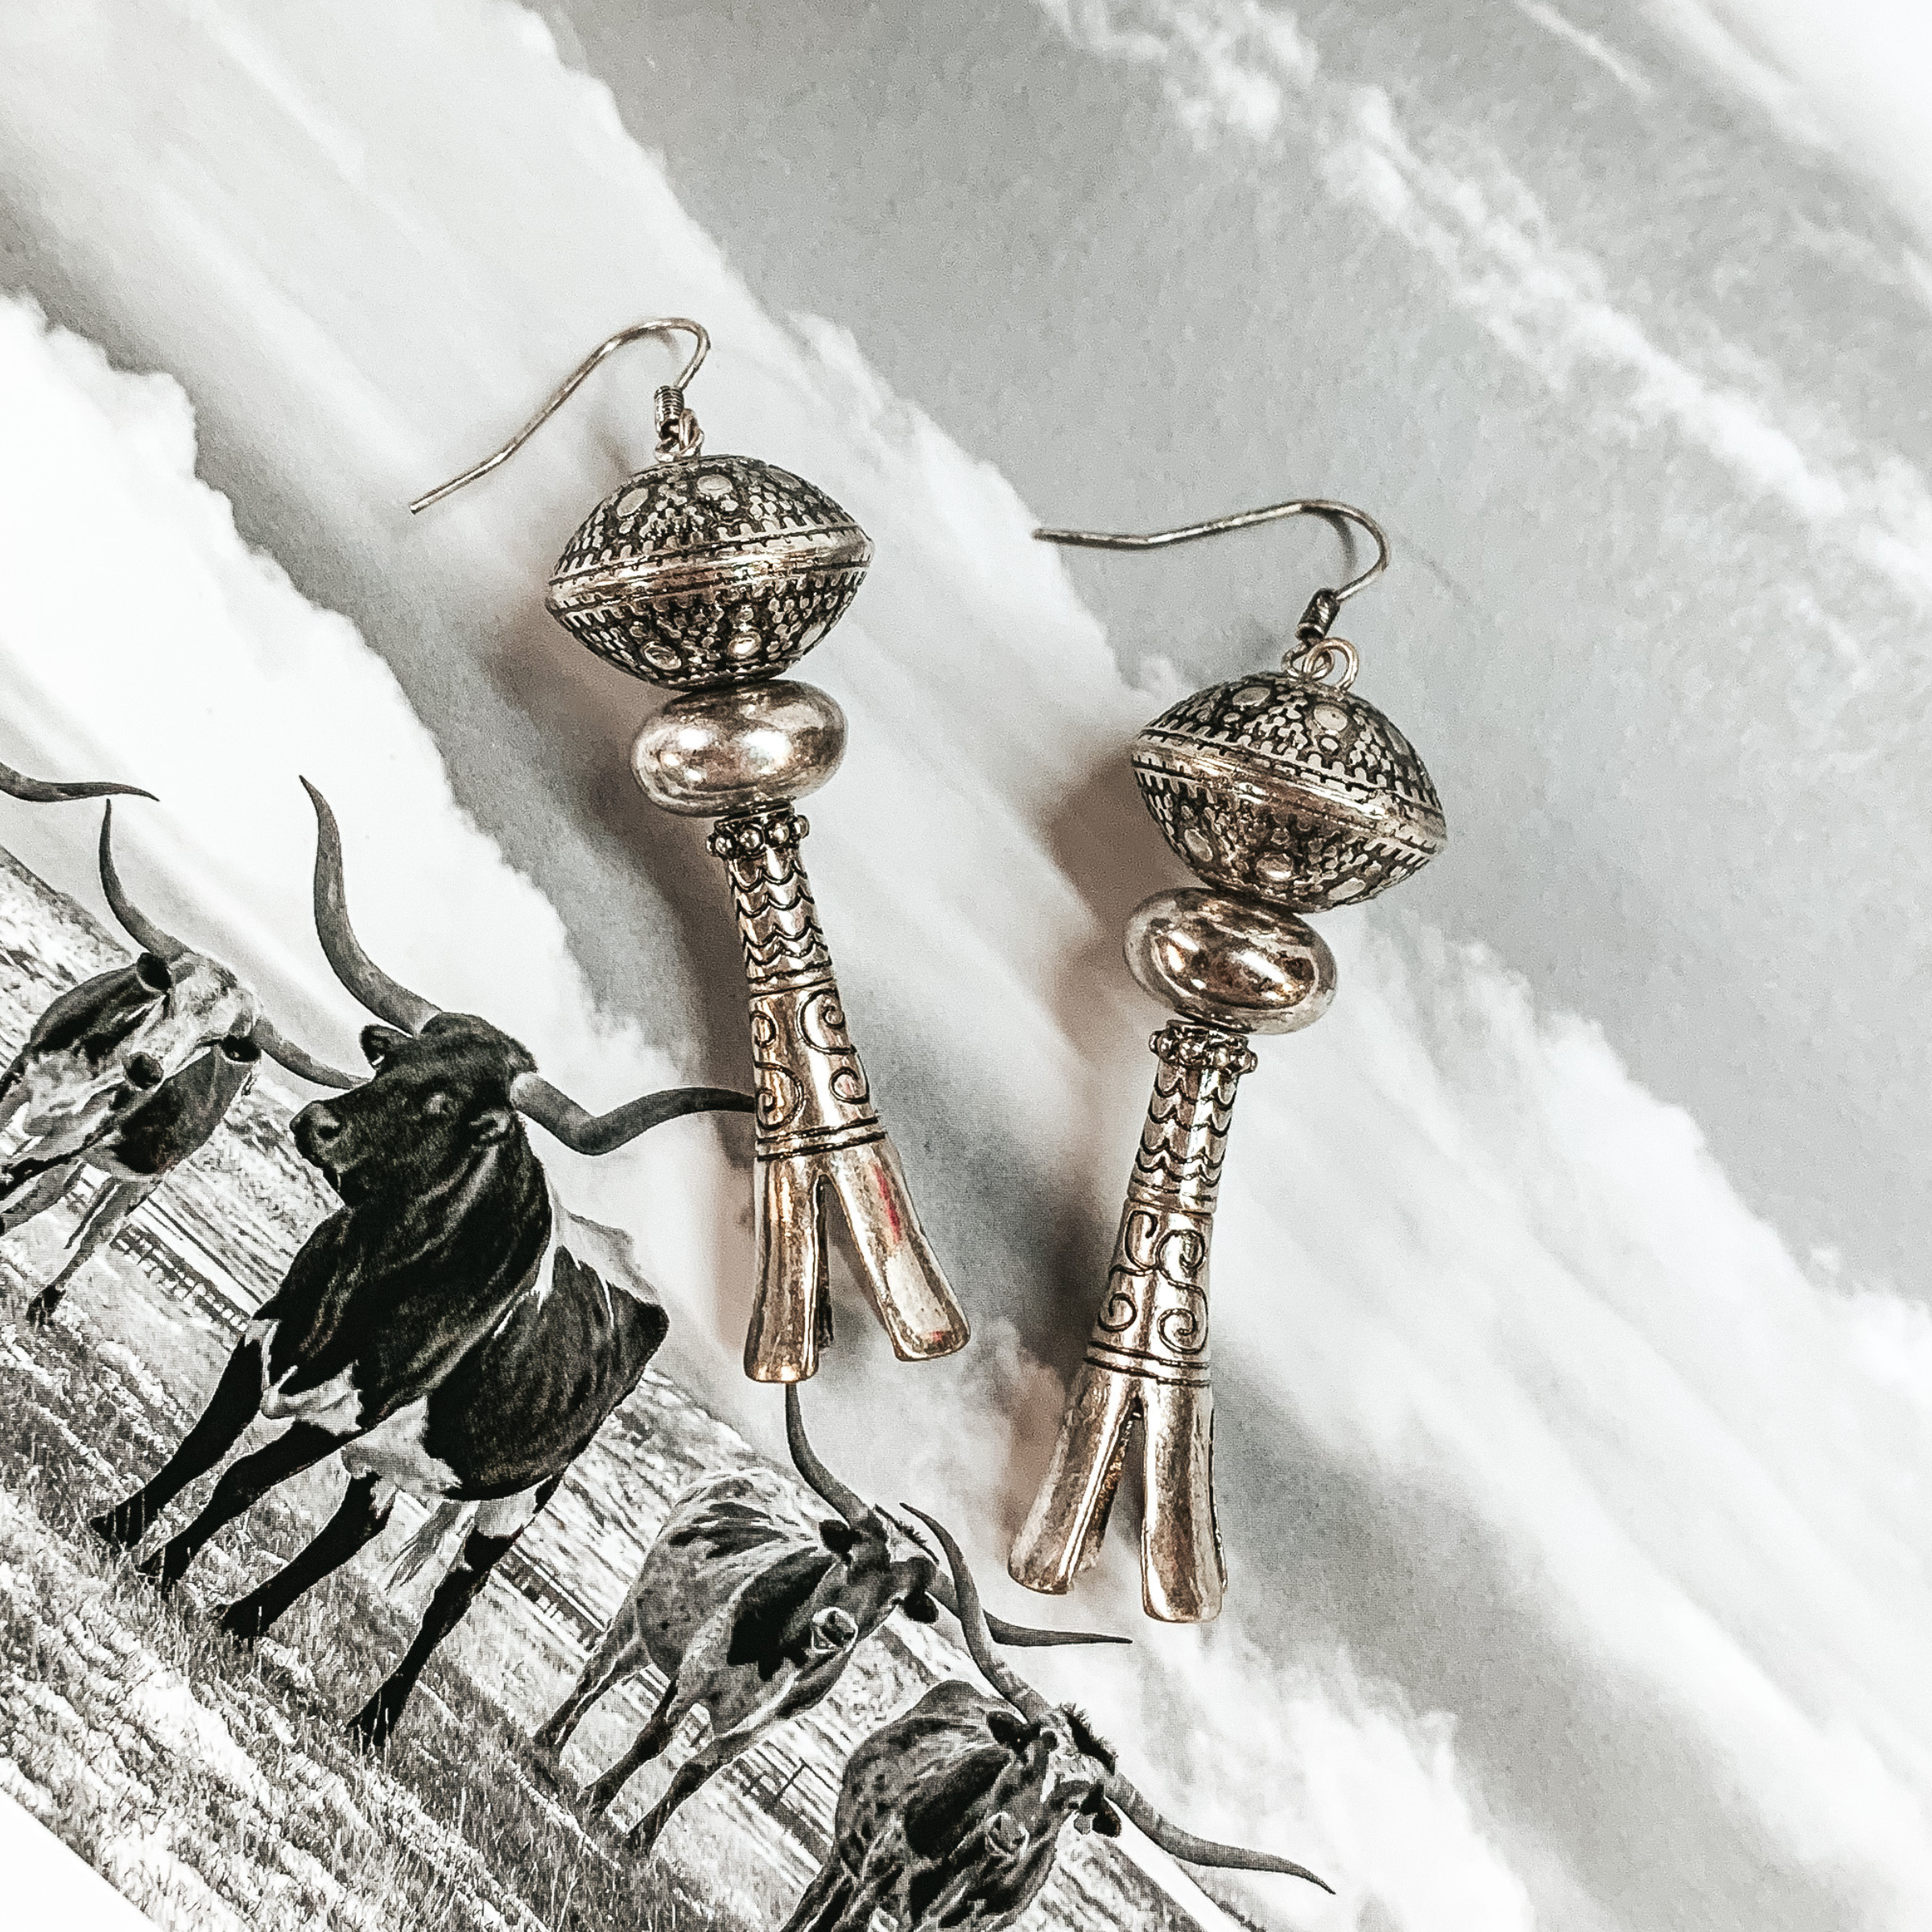 Silver Tone Squash Blossom Dangle Earrings with Engraving - Giddy Up Glamour Boutique